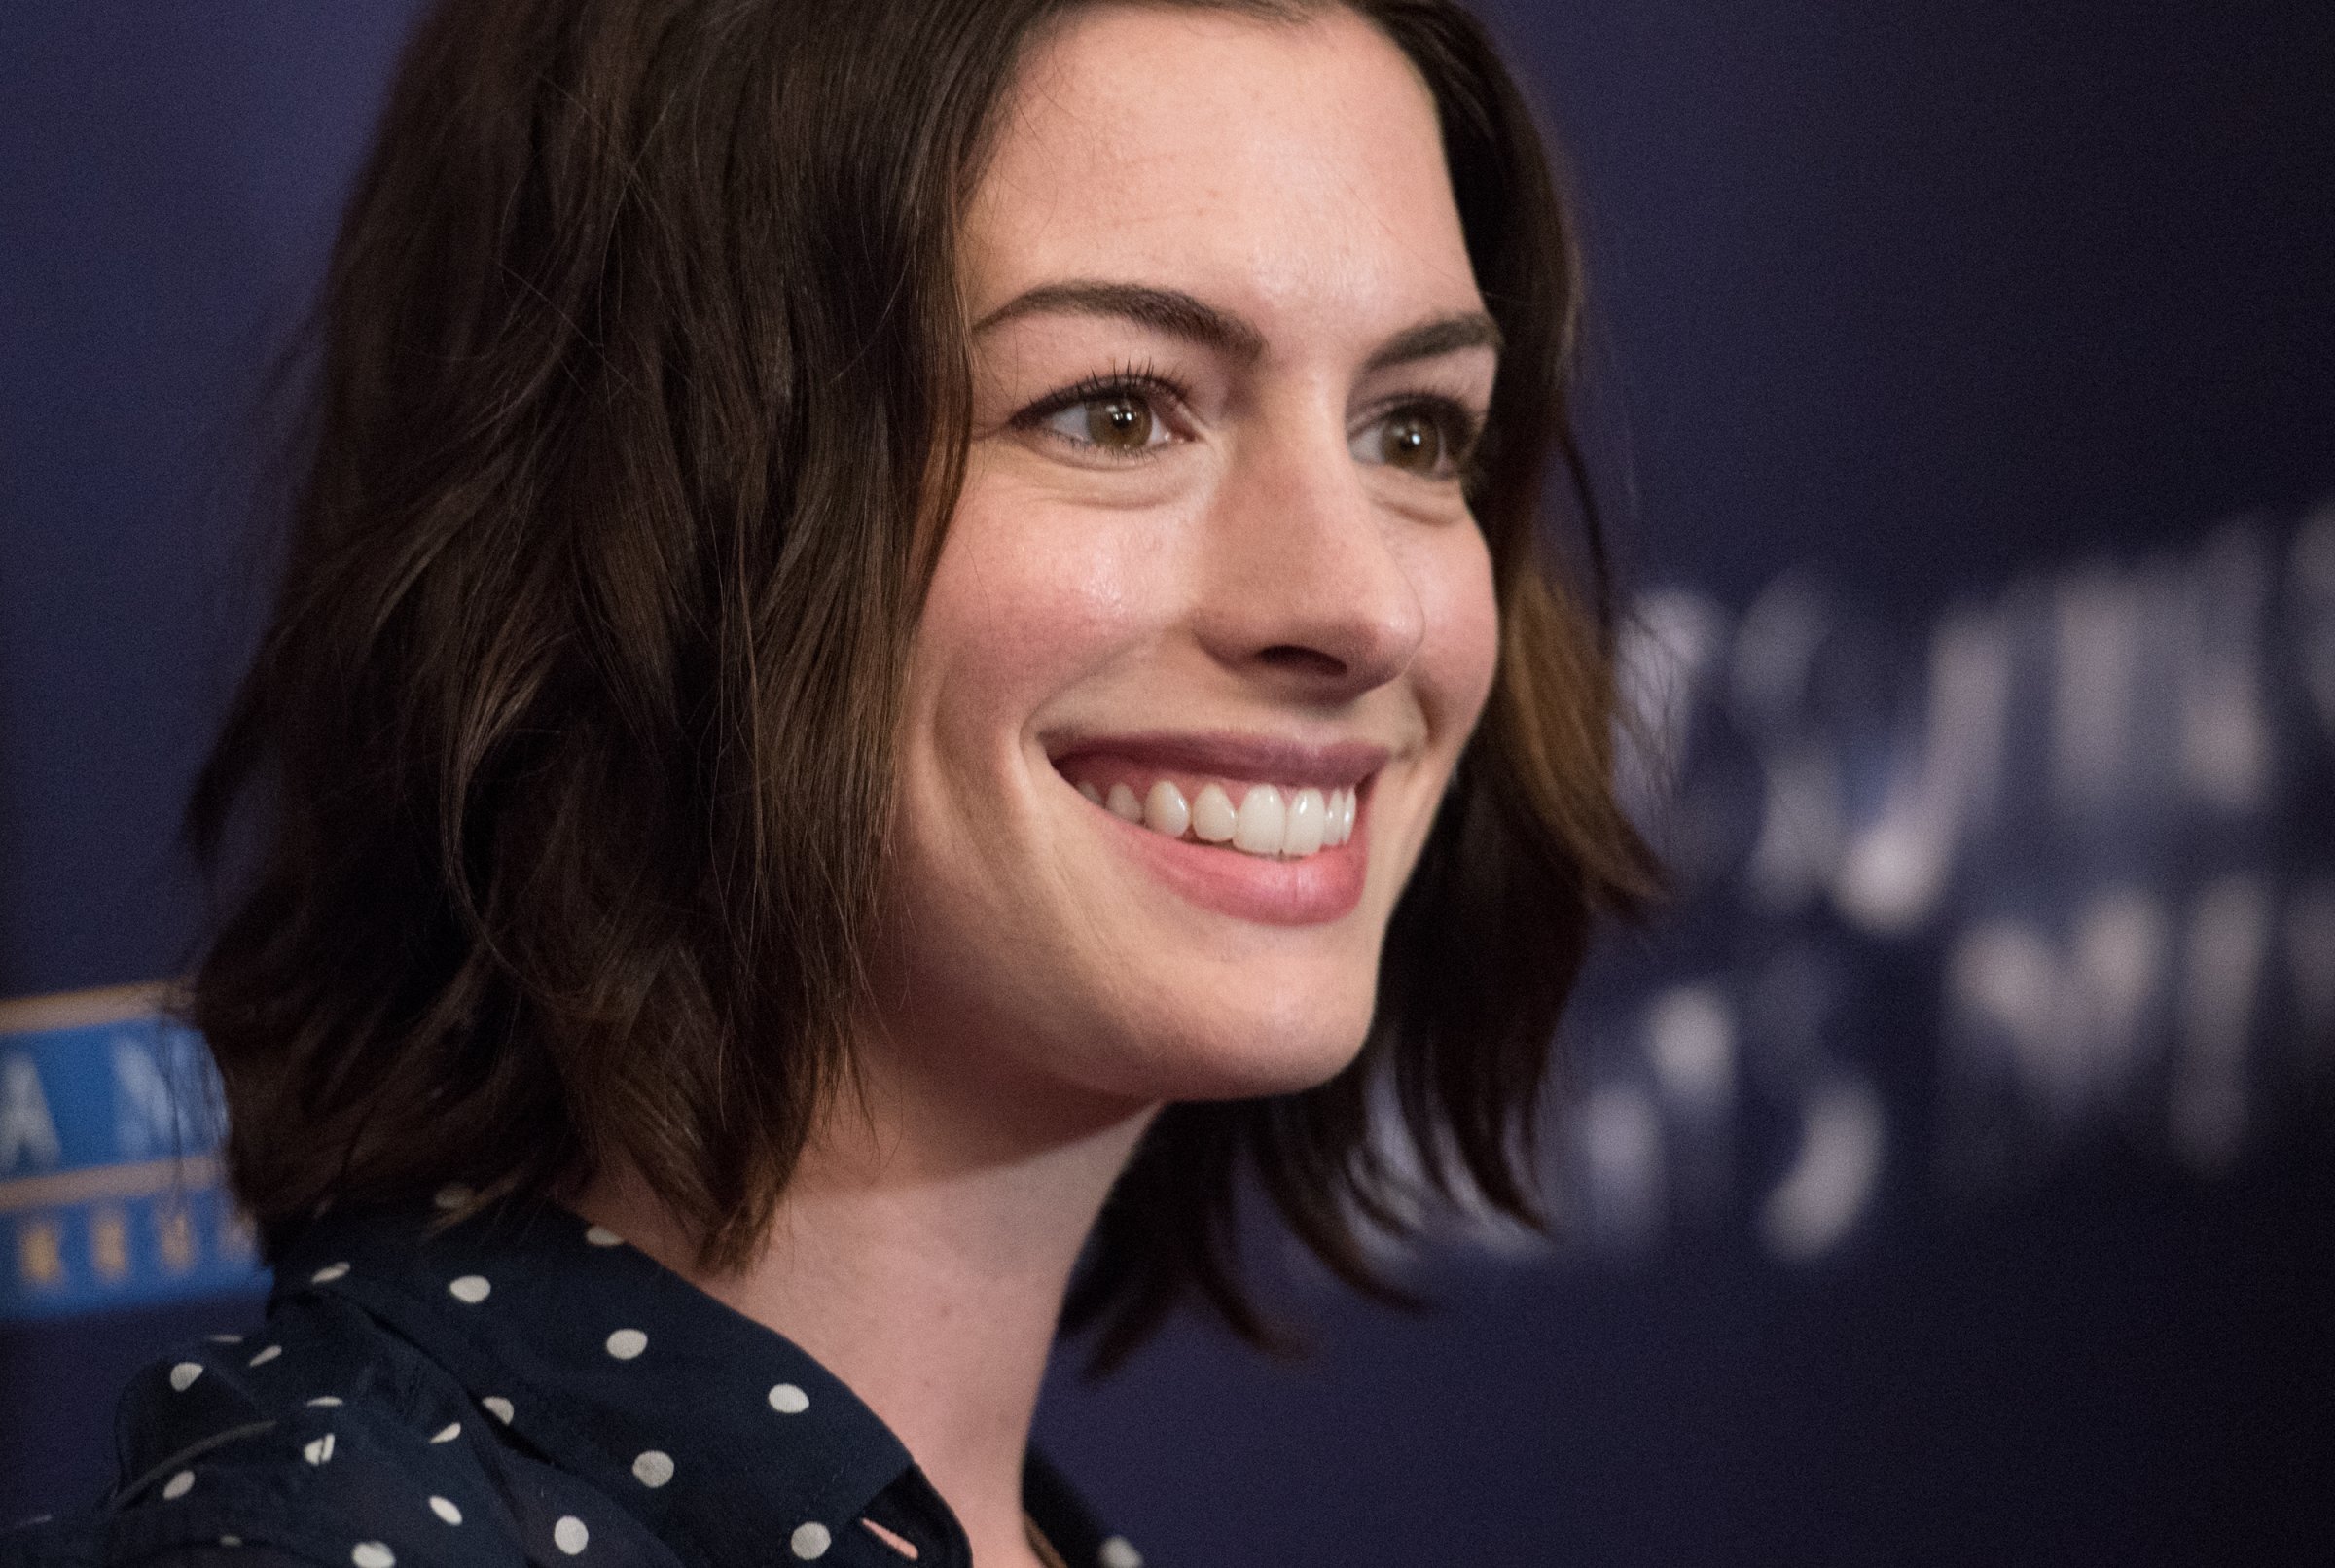 Actress Anne Hathaway attends 'A Midsummer Night's Dream" New York premiere at DGA Theater on June 15, 2015 in New York City.